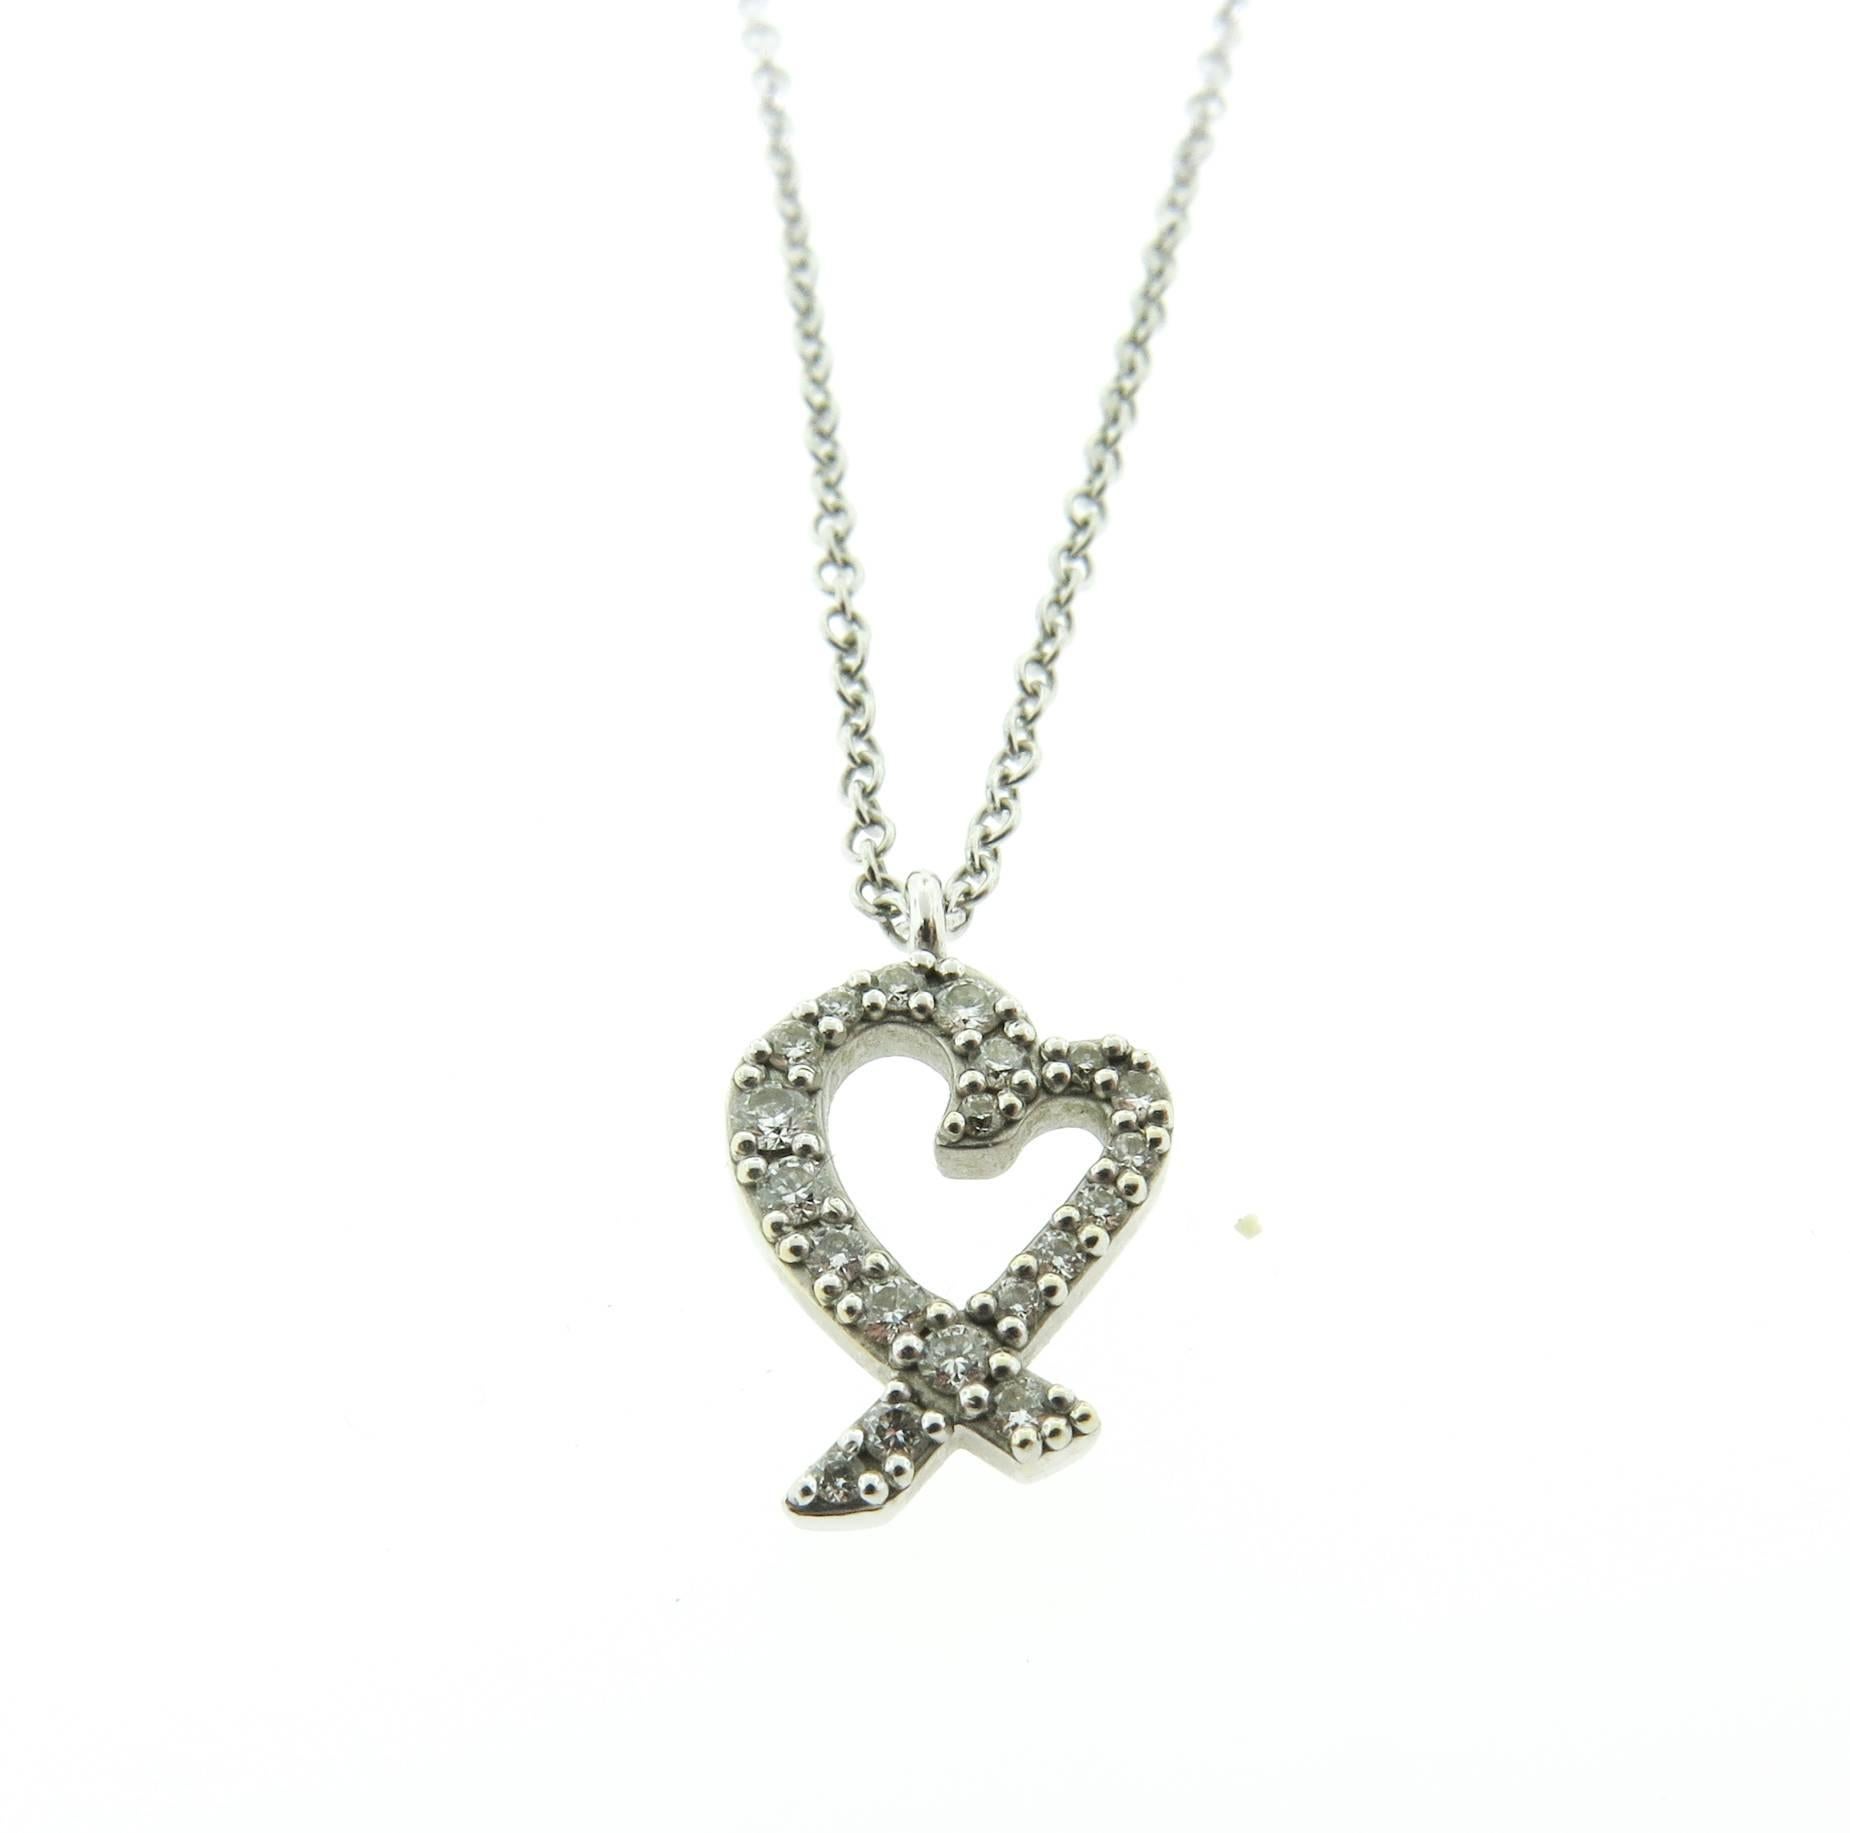 A timeless design by Paloma Picasso. This  beautiful necklace from Tiffany & Co. Loving Heart collection is made in 18k white gold and completed with pavé diamonds estimated 0.15 carats.  16” Chain. Original Tiffany & Co. Pendant Box Included.